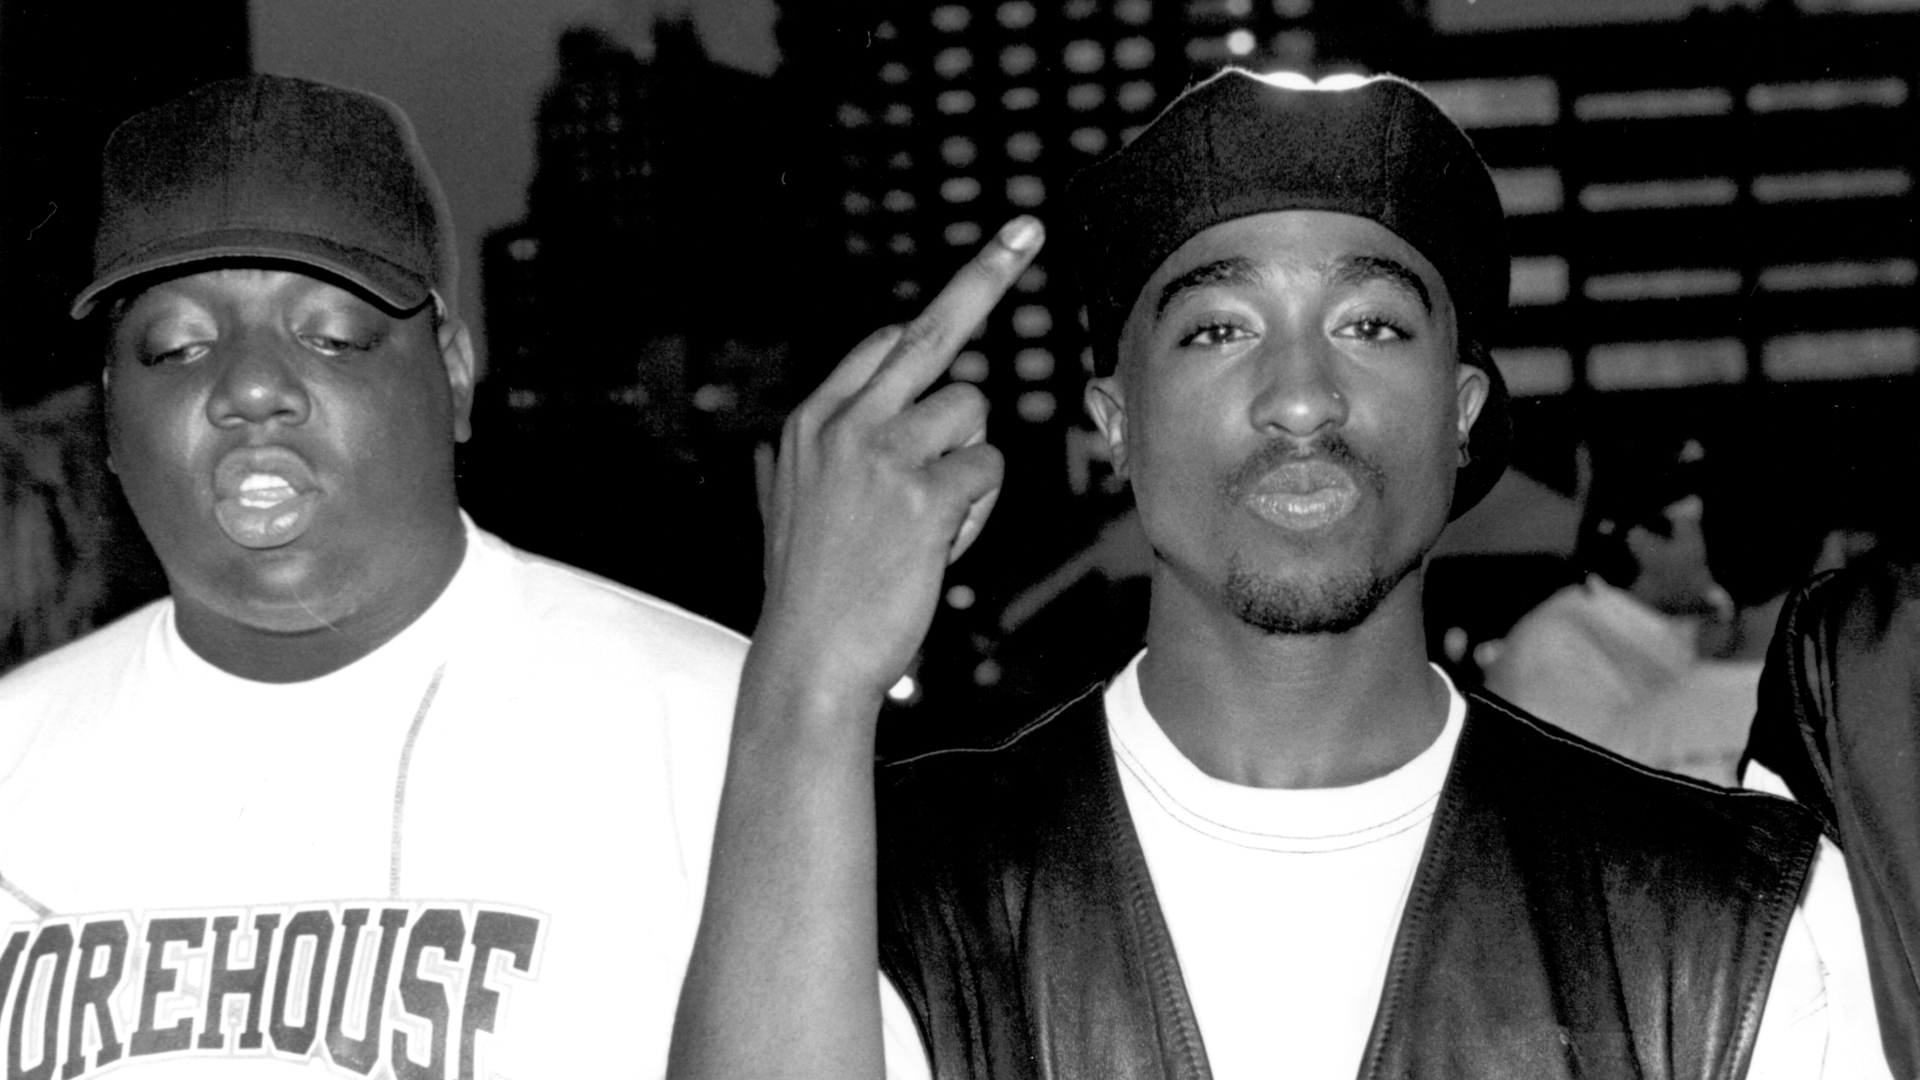 Lance Rivera Looks Back on Biggie Hearing 2Pac’s “Hit ’Em Up” for the 1st Time After Saying He ‘Cried Like a Baby’